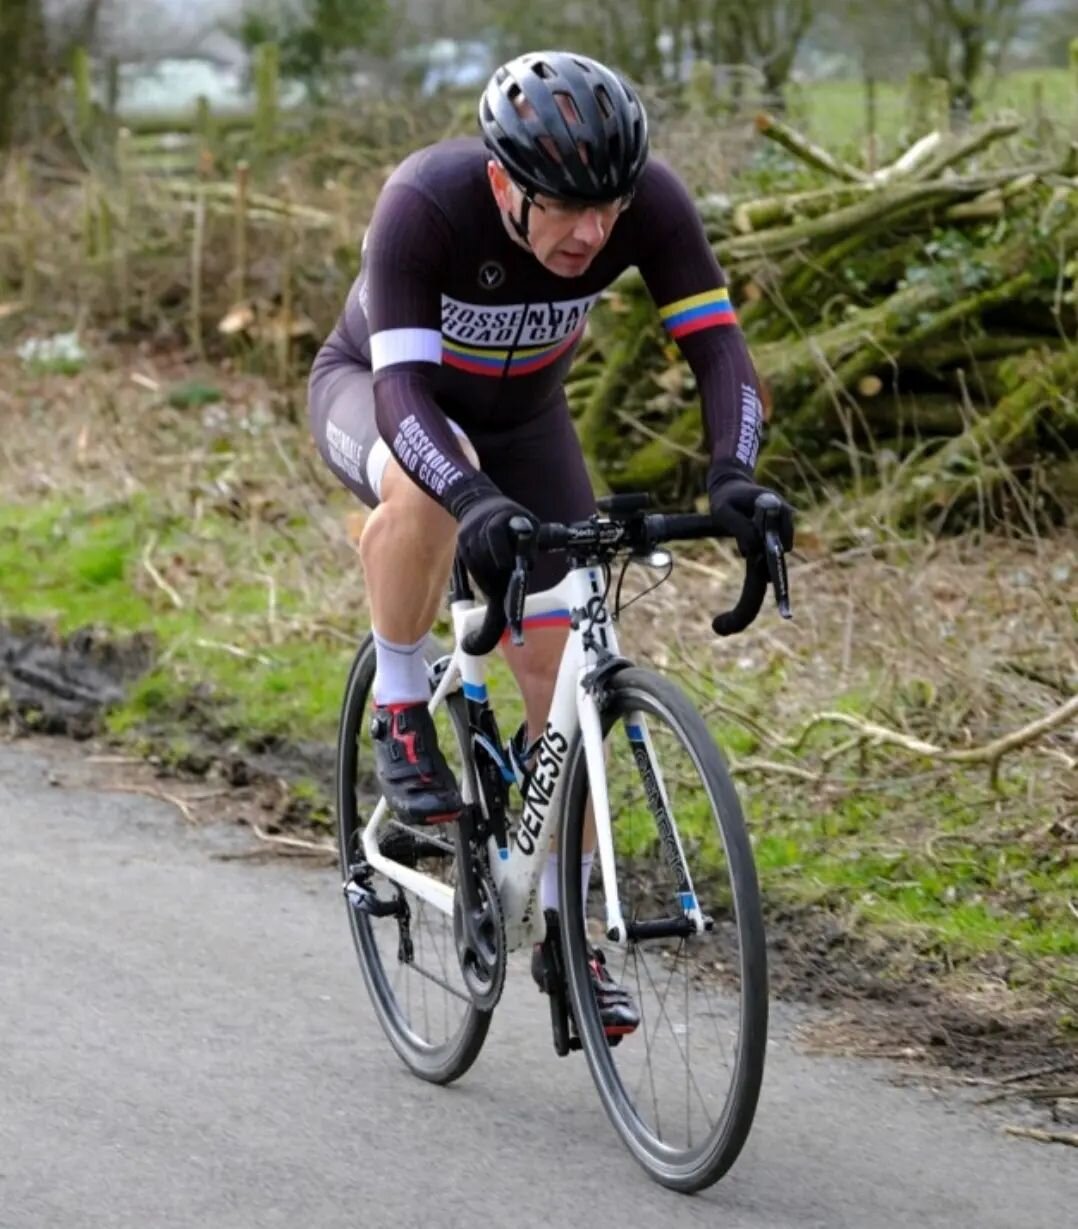 Rossendale Road Club opened the 2022 cycling time trial series by hosting their traditional hilly 11 mile event at Bolton by Bowland on Saturday, the first round of the North Lancs Spoco series. And, for the first time for a few years, the event was 